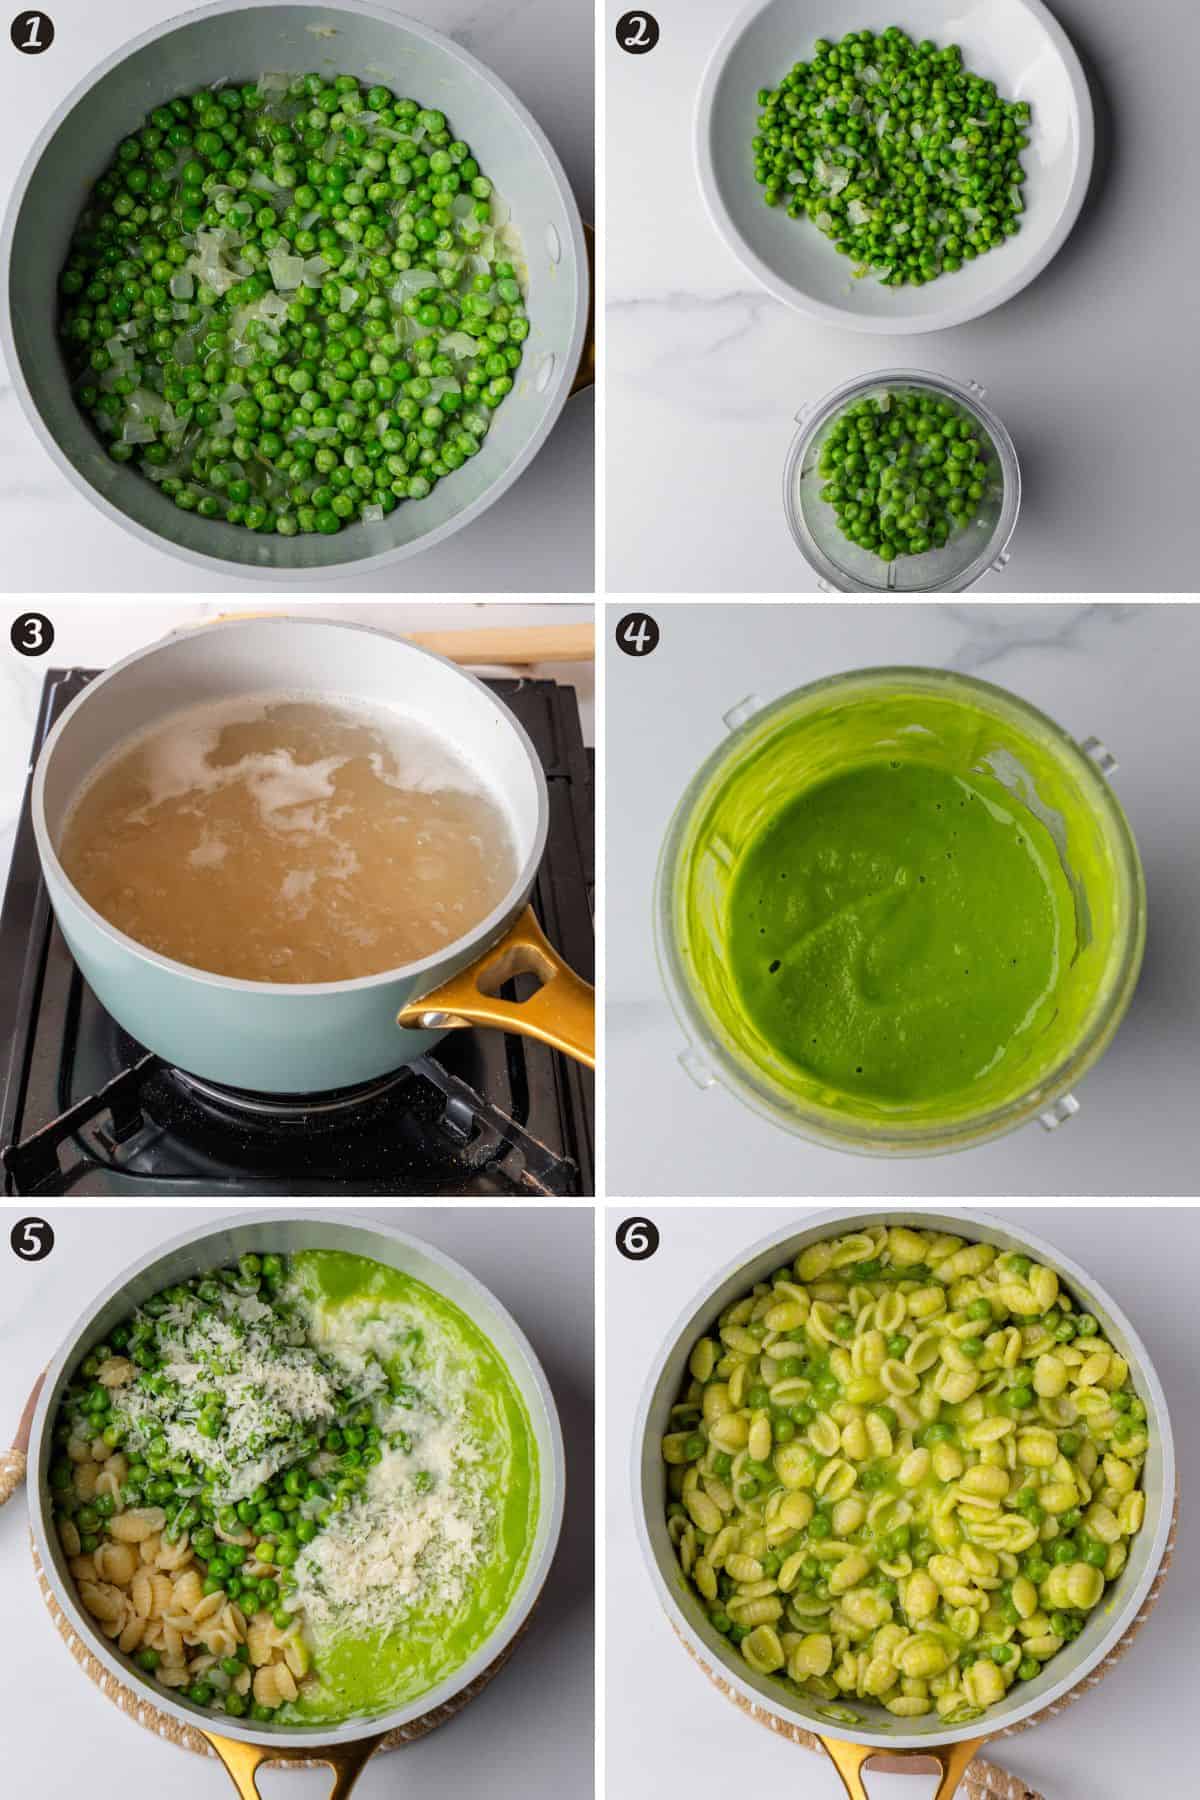 Steps on how to make pasta with peas